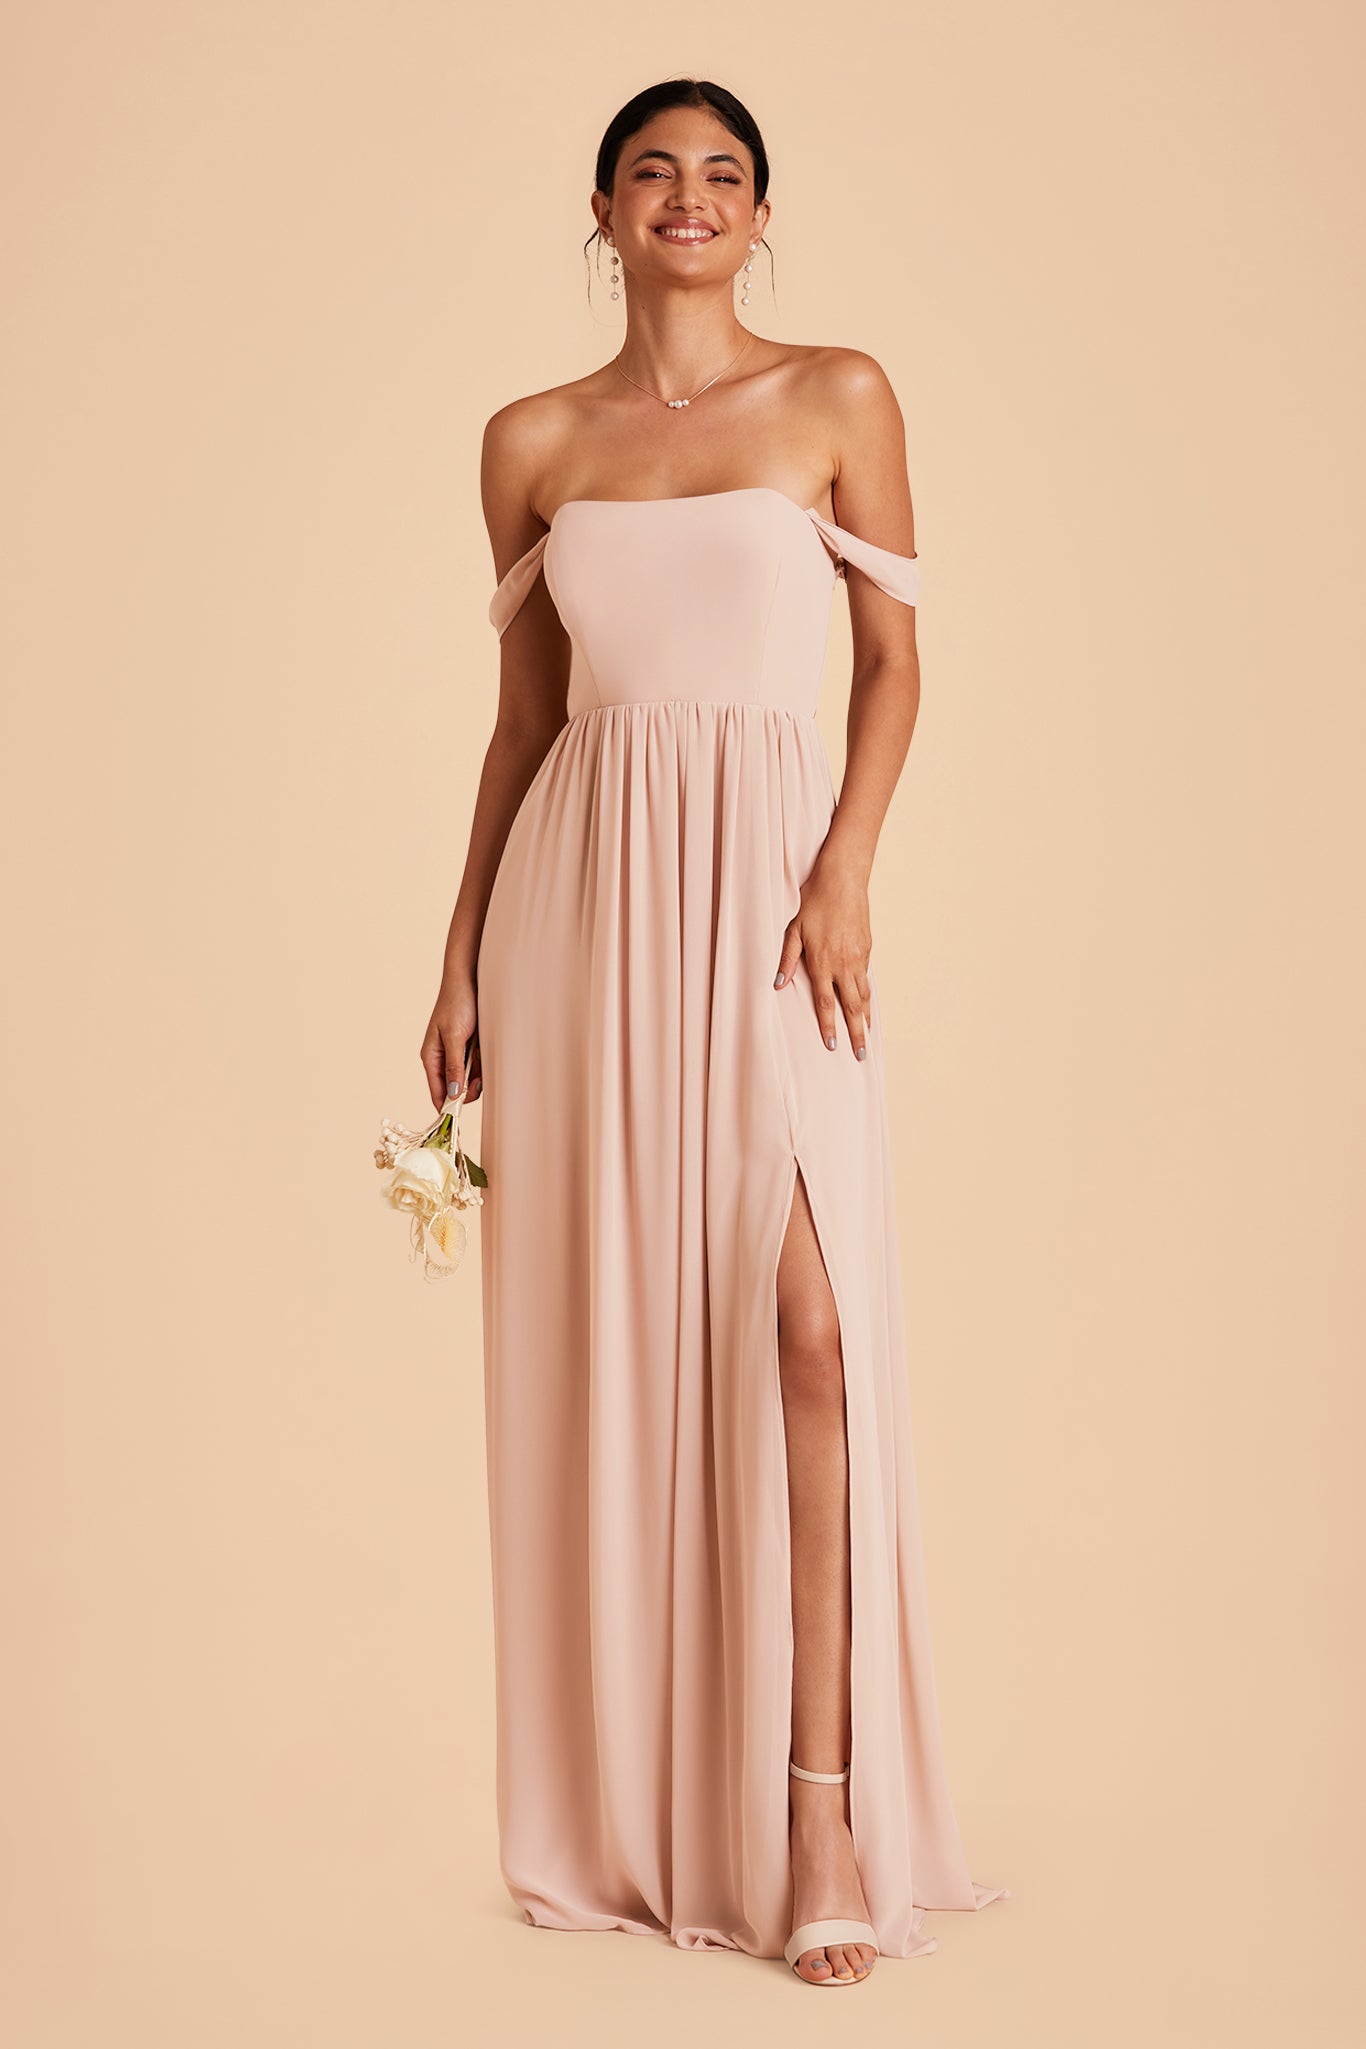 Blush Prom Dress-Blush Homecoming Dress|Shimmer Boutique Blush by Alexia  20512 Prom Dresses Dallas-Formal Dresses Dallas|Shimmer Boutique